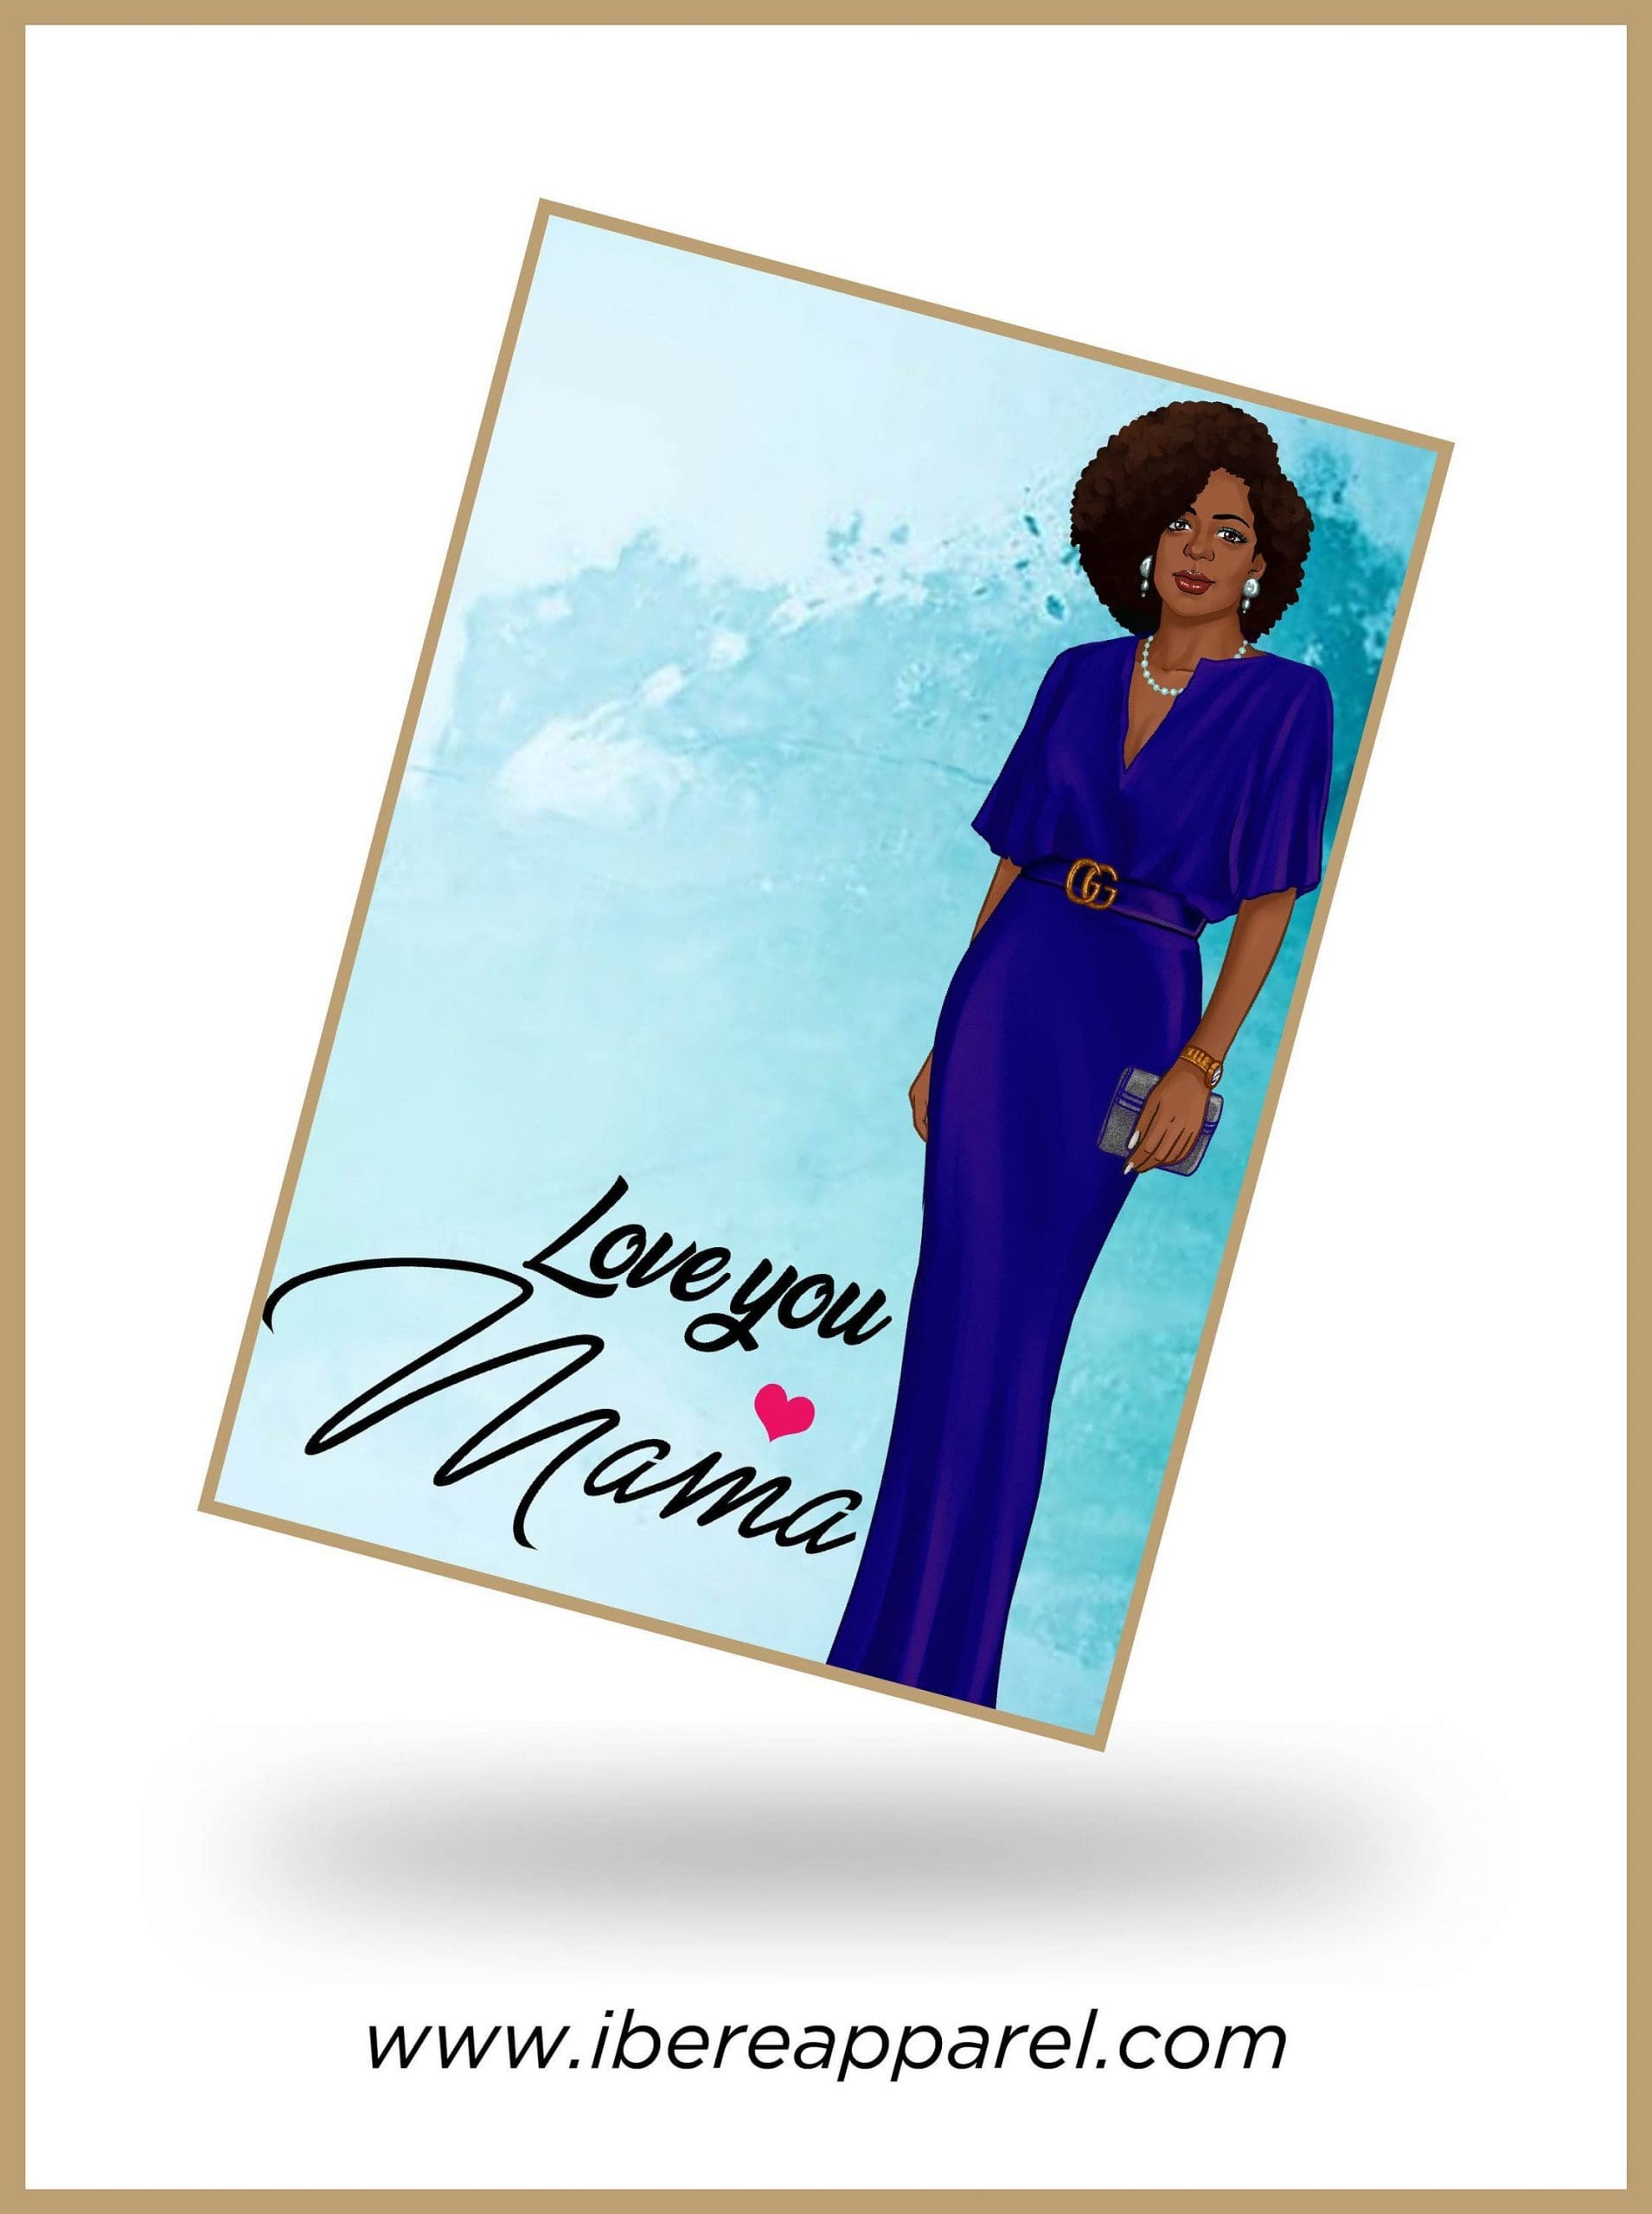 Love You Mama Card, wakuda, african print fans, black-owned brands, black pound day